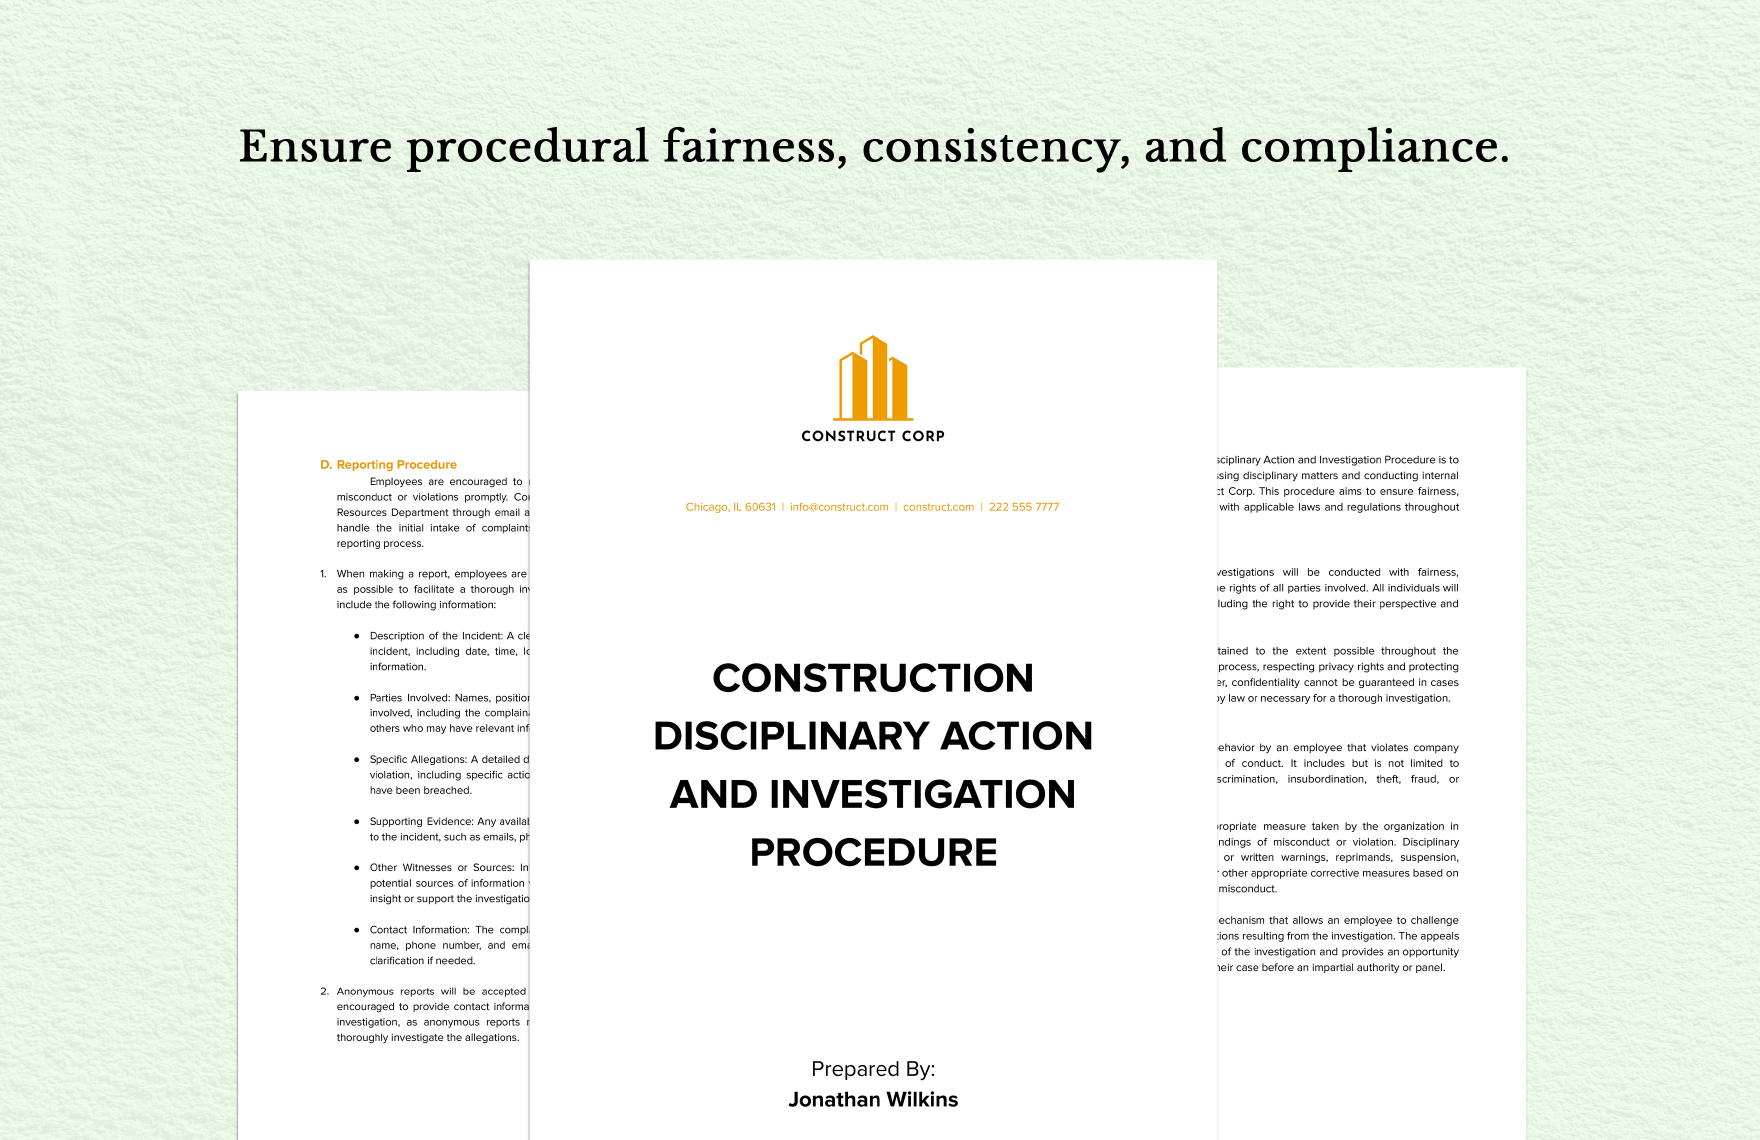 Construction Disciplinary Action and Investigation Procedure 